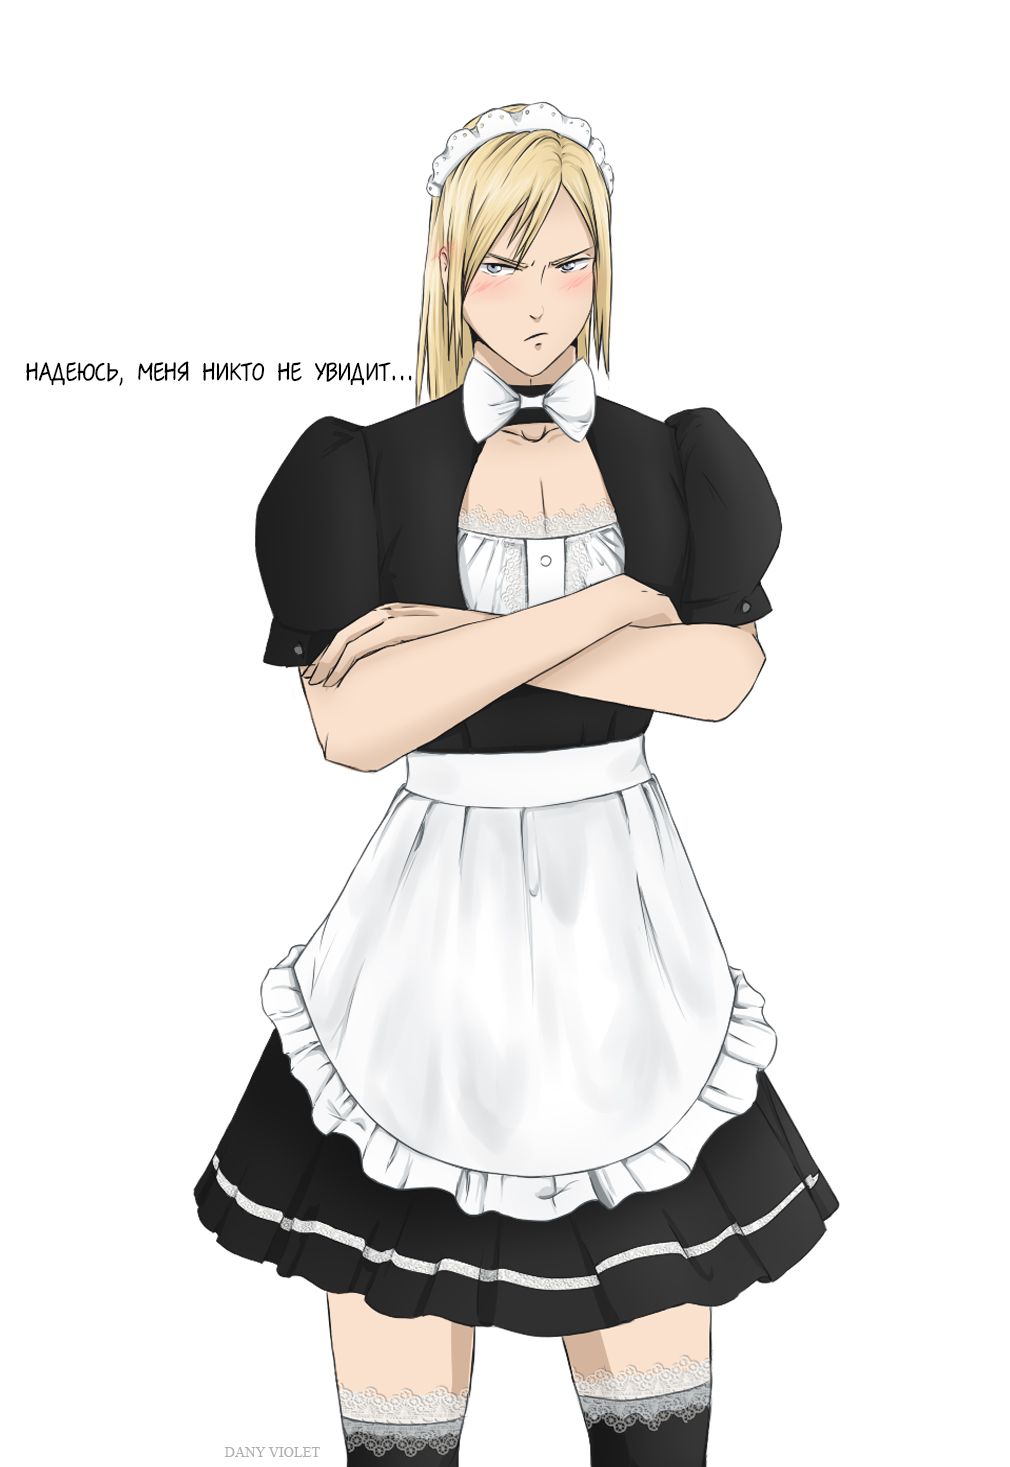 Flashy Flash from One Punch Man fan art in maid costume